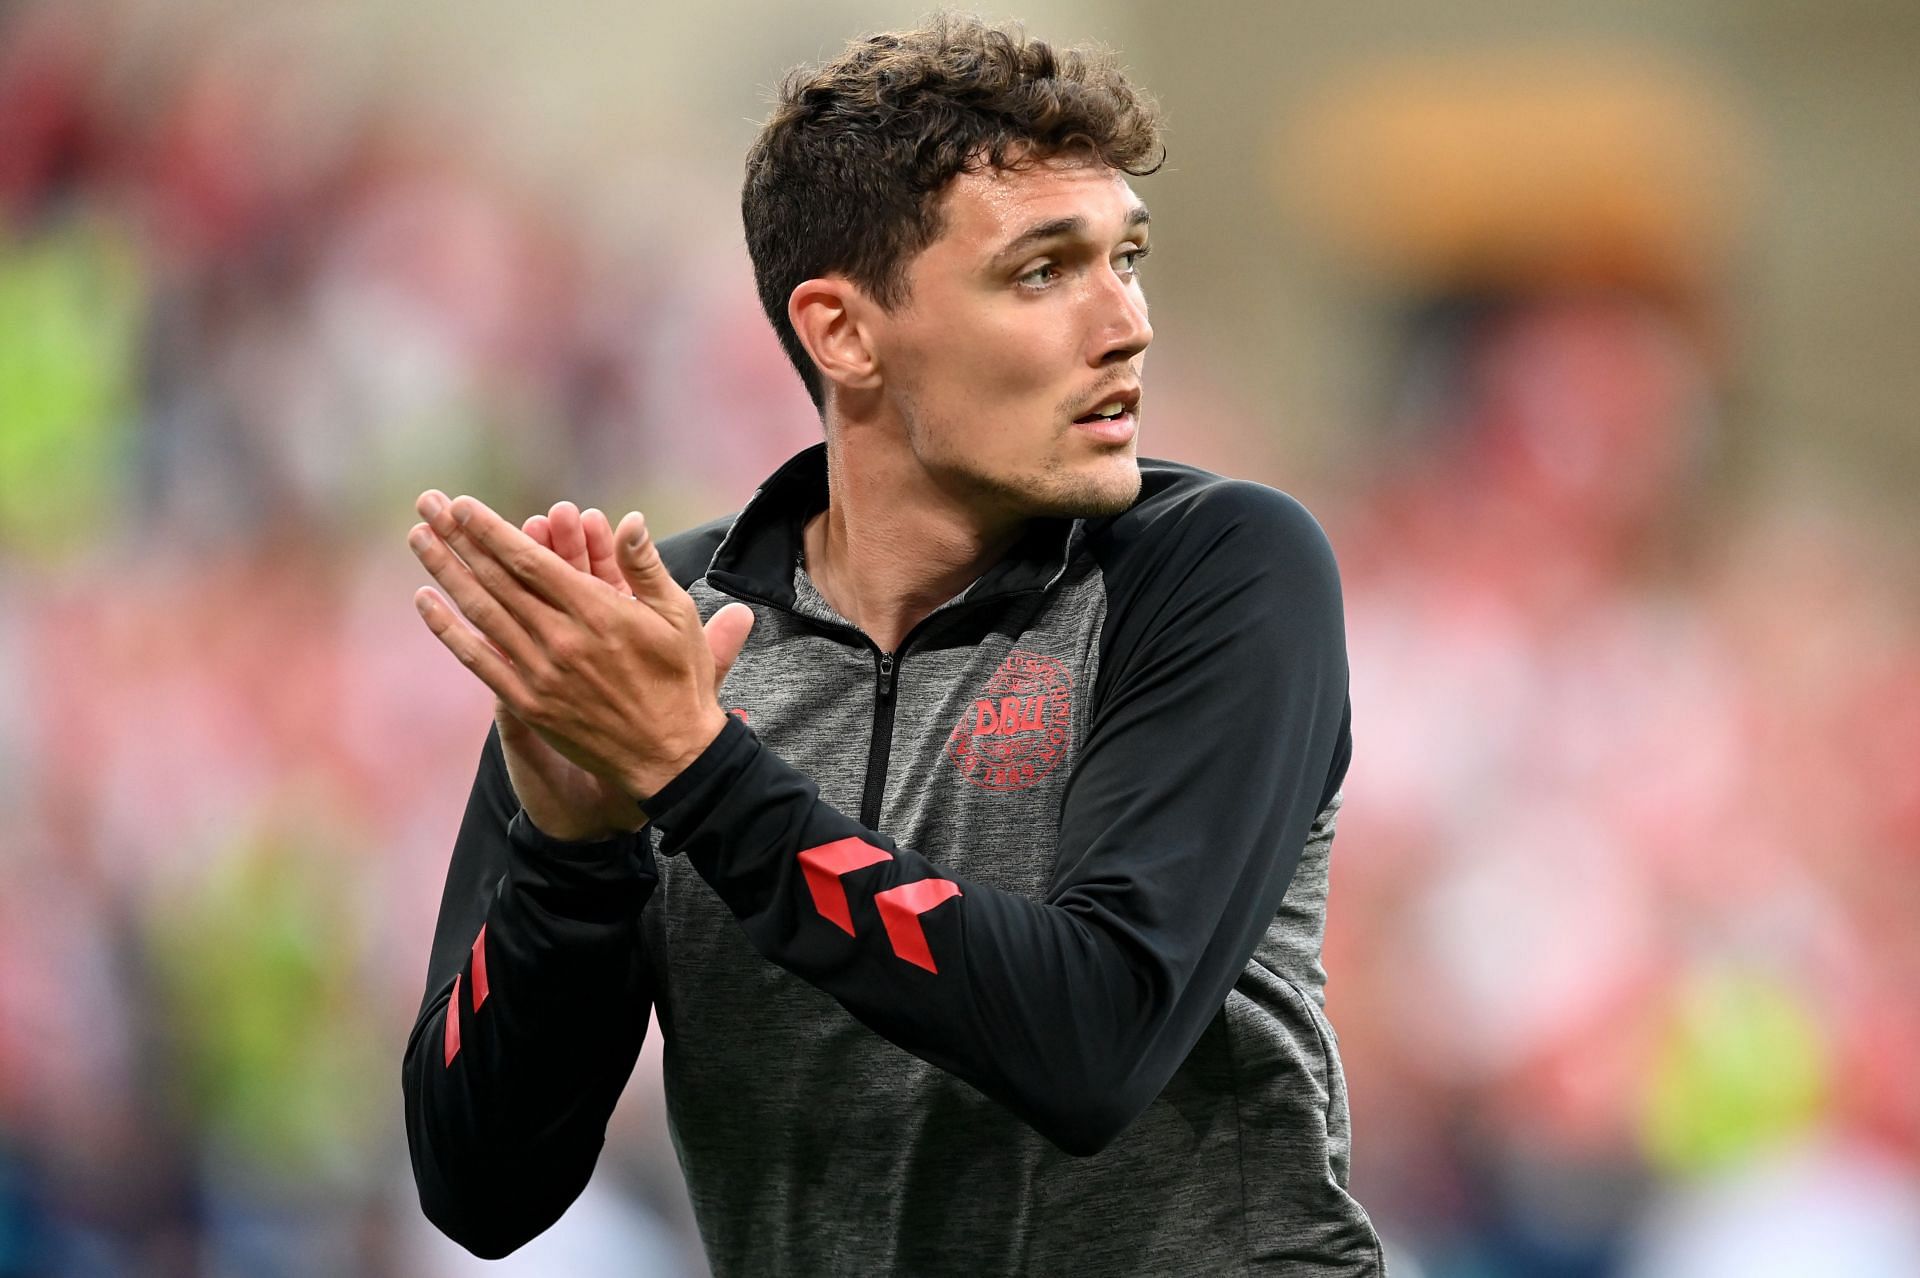 Barcelona are planning to sign Andreas Christensen for free.